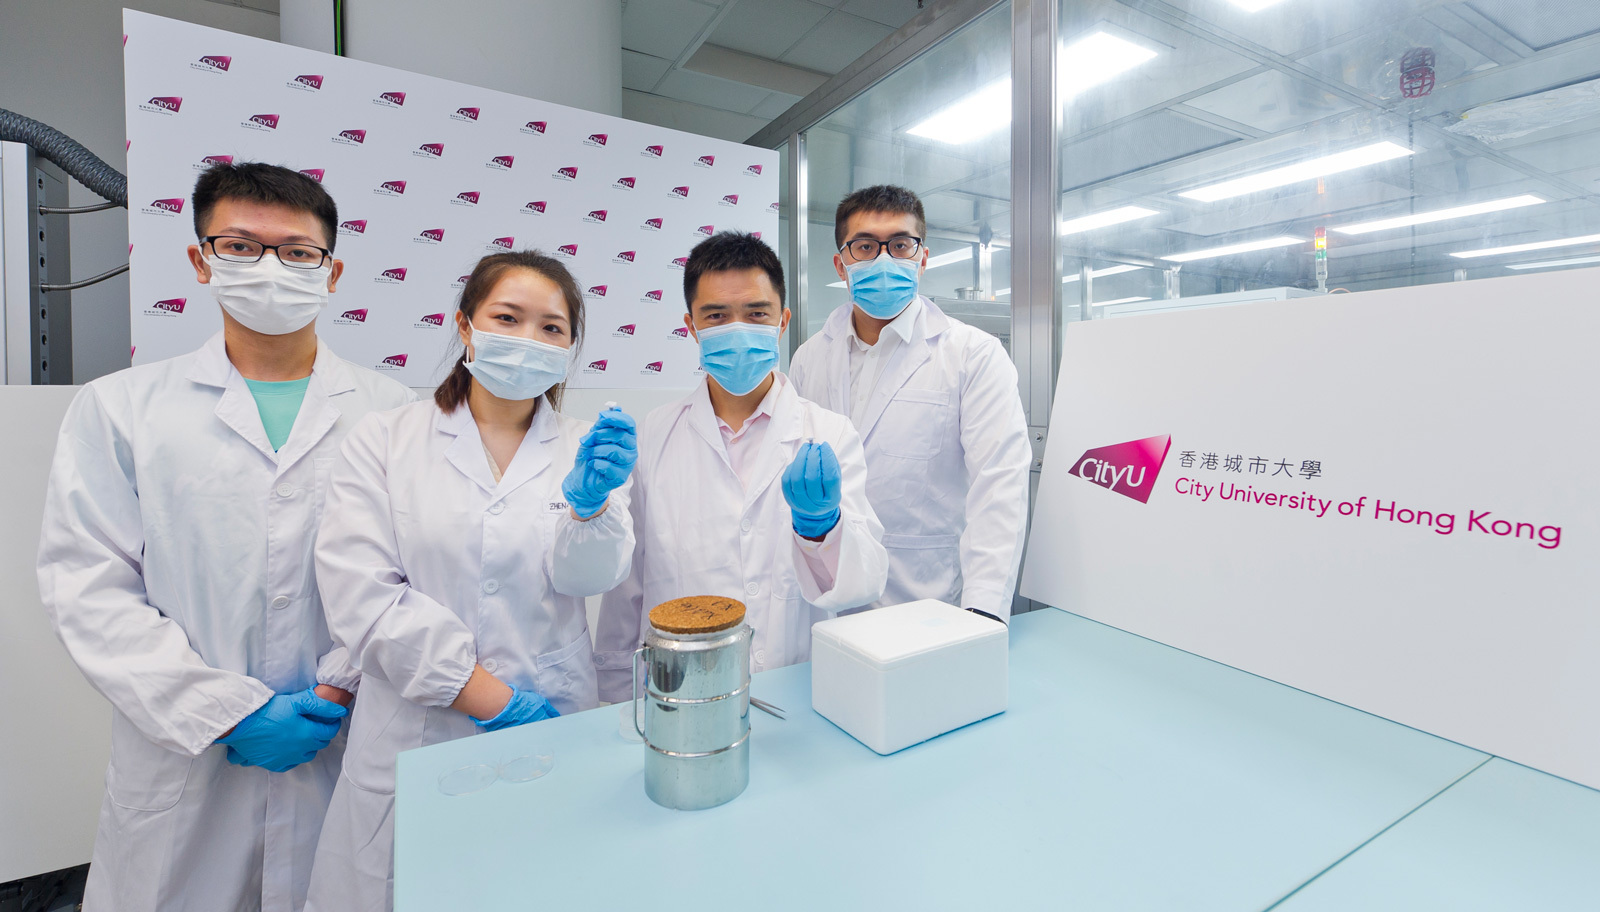 Dr Xu Chenjie (second from right) and his research team.